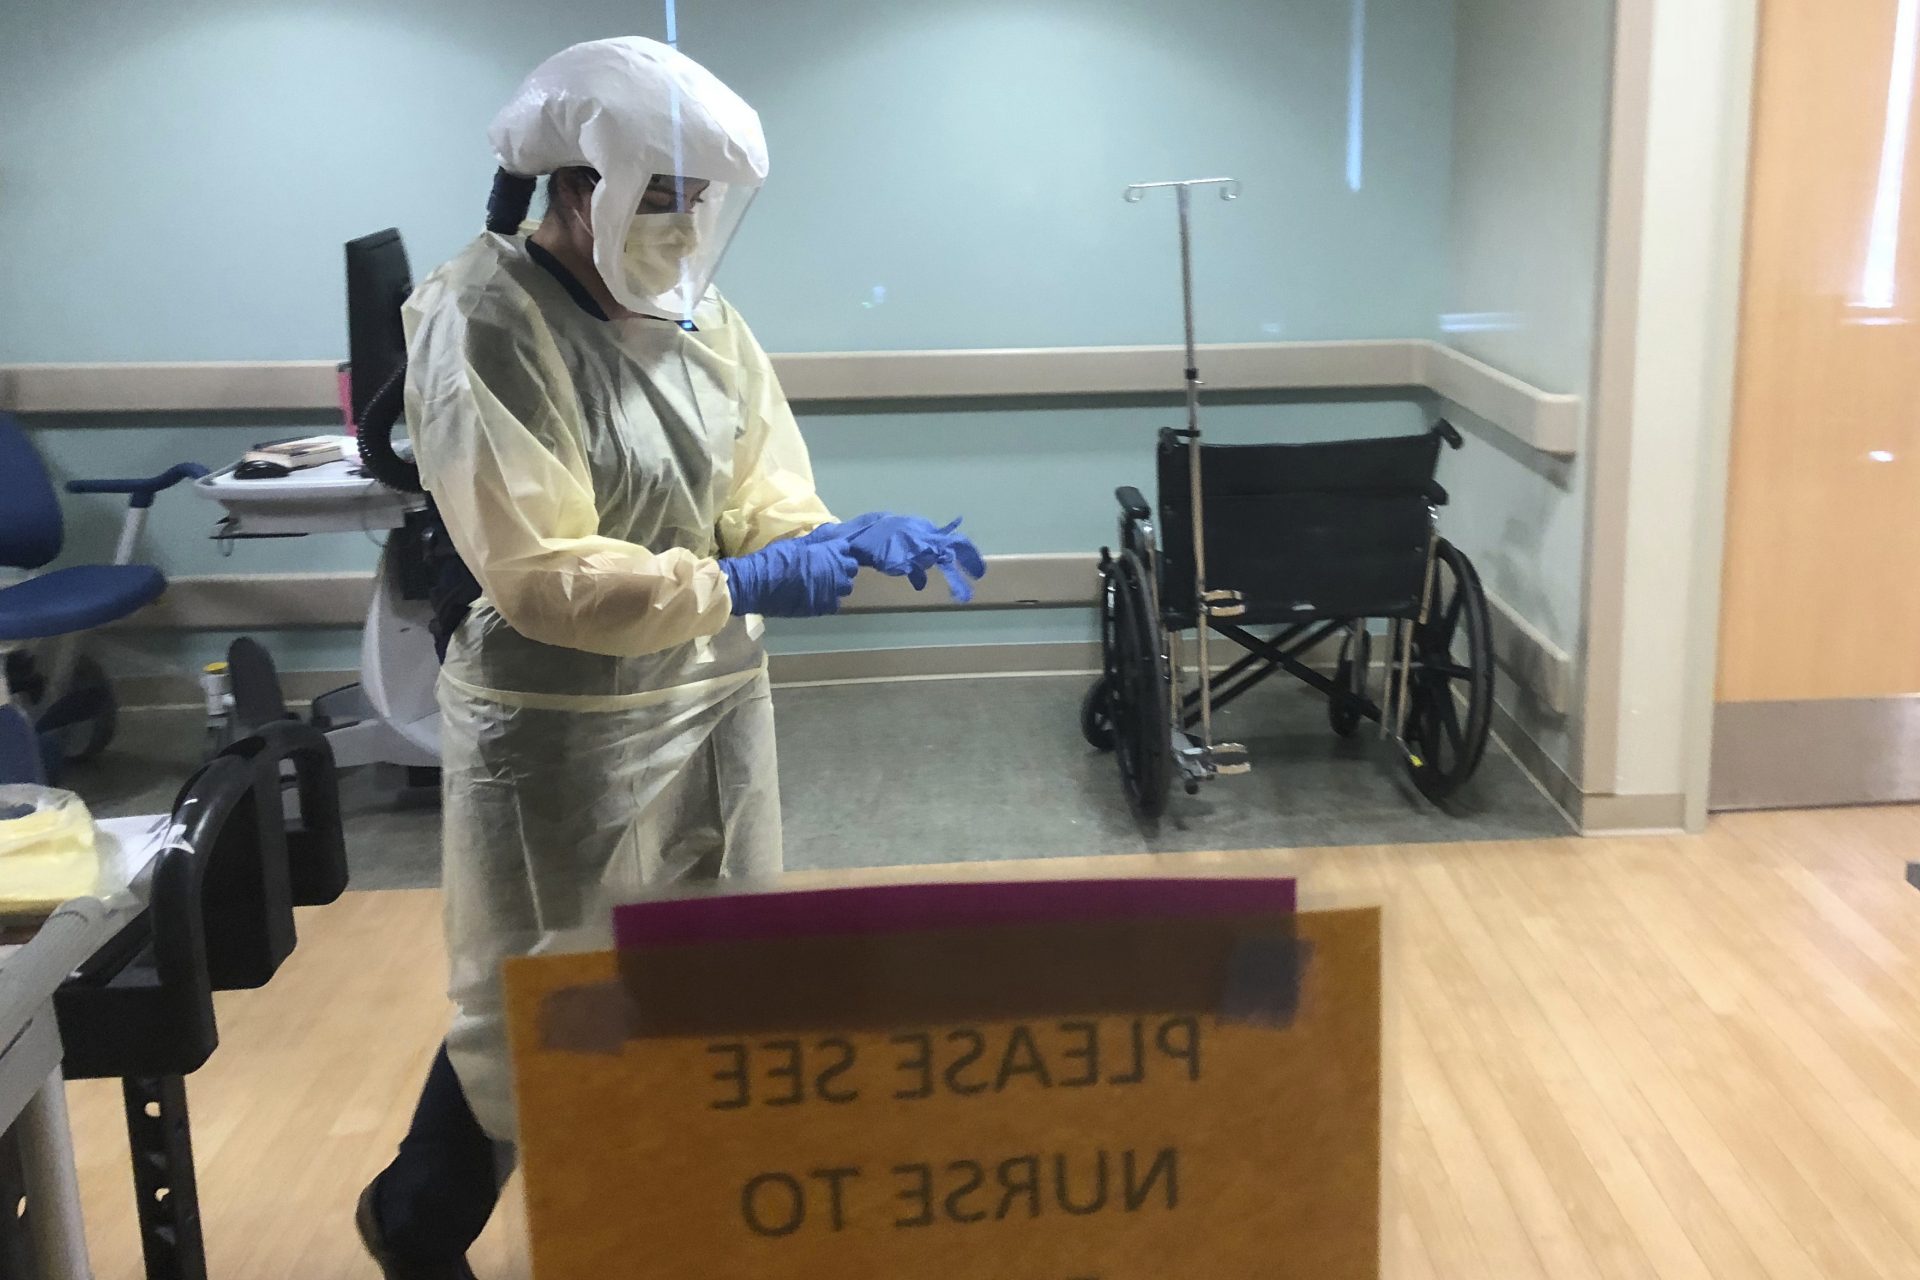 In this photo provided by the UPMC, Dr. Ruba Nicola, chairwoman of family medicine at UPMC East, adjusts her personal protective equipment at the UPMC East hospital in Monroeville, Pa., on April 17, 2020. The University of Pittsburgh Medical Centerâ€™s 40 hospitals in Pennsylvania, New York, Maryland and Ohio joined a study underway in the United Kingdom, Australia and New Zealand that randomly assigns patients to one of dozens of possible treatments and uses artificial intelligence to adapt treatments, based on the results.